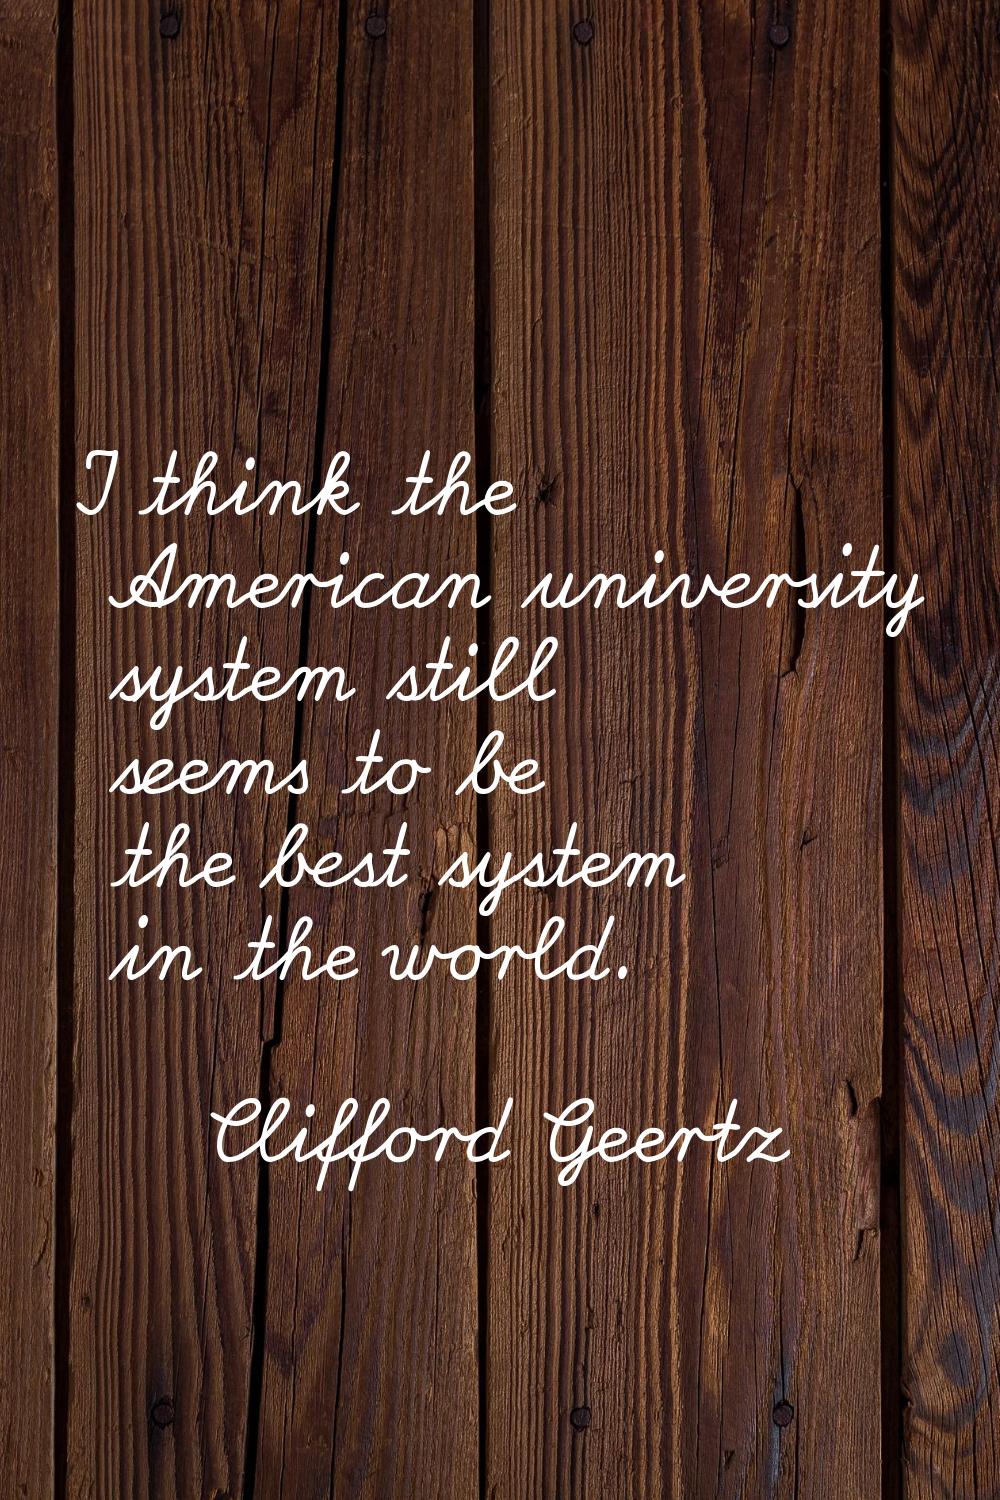 I think the American university system still seems to be the best system in the world.